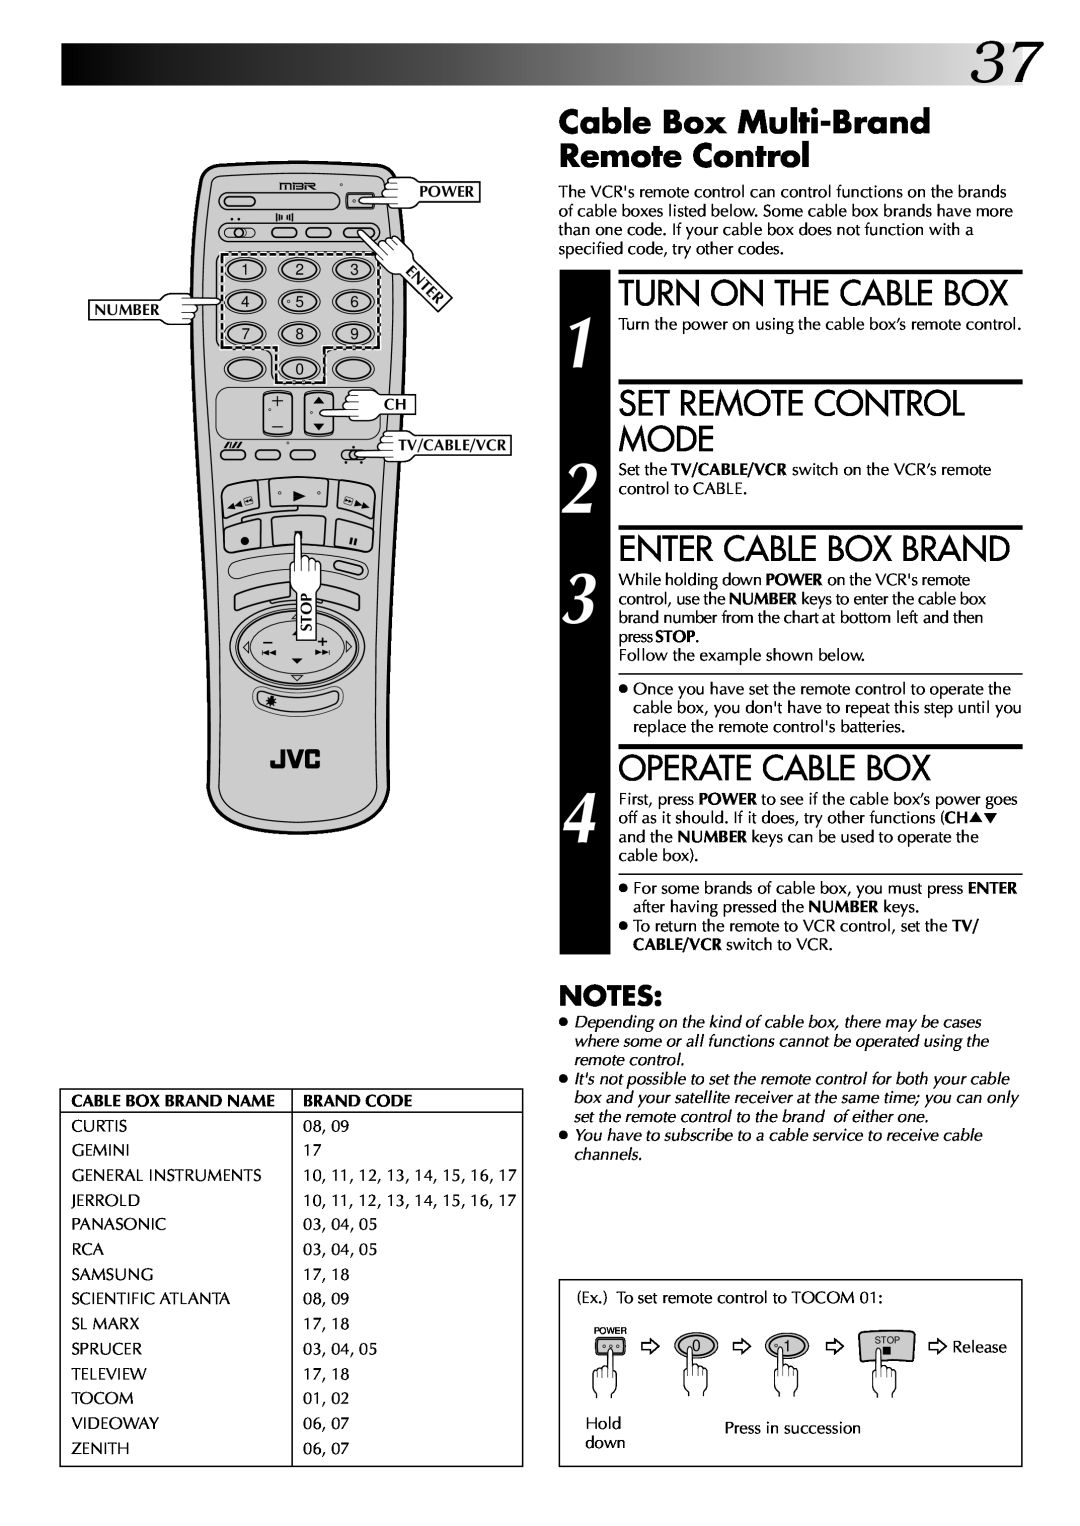 JVC HR-J7004UM manual Turn On The Cable Box, Enter Cable Box Brand, Operate Cable Box, Cable Box Multi-Brand Remote Control 